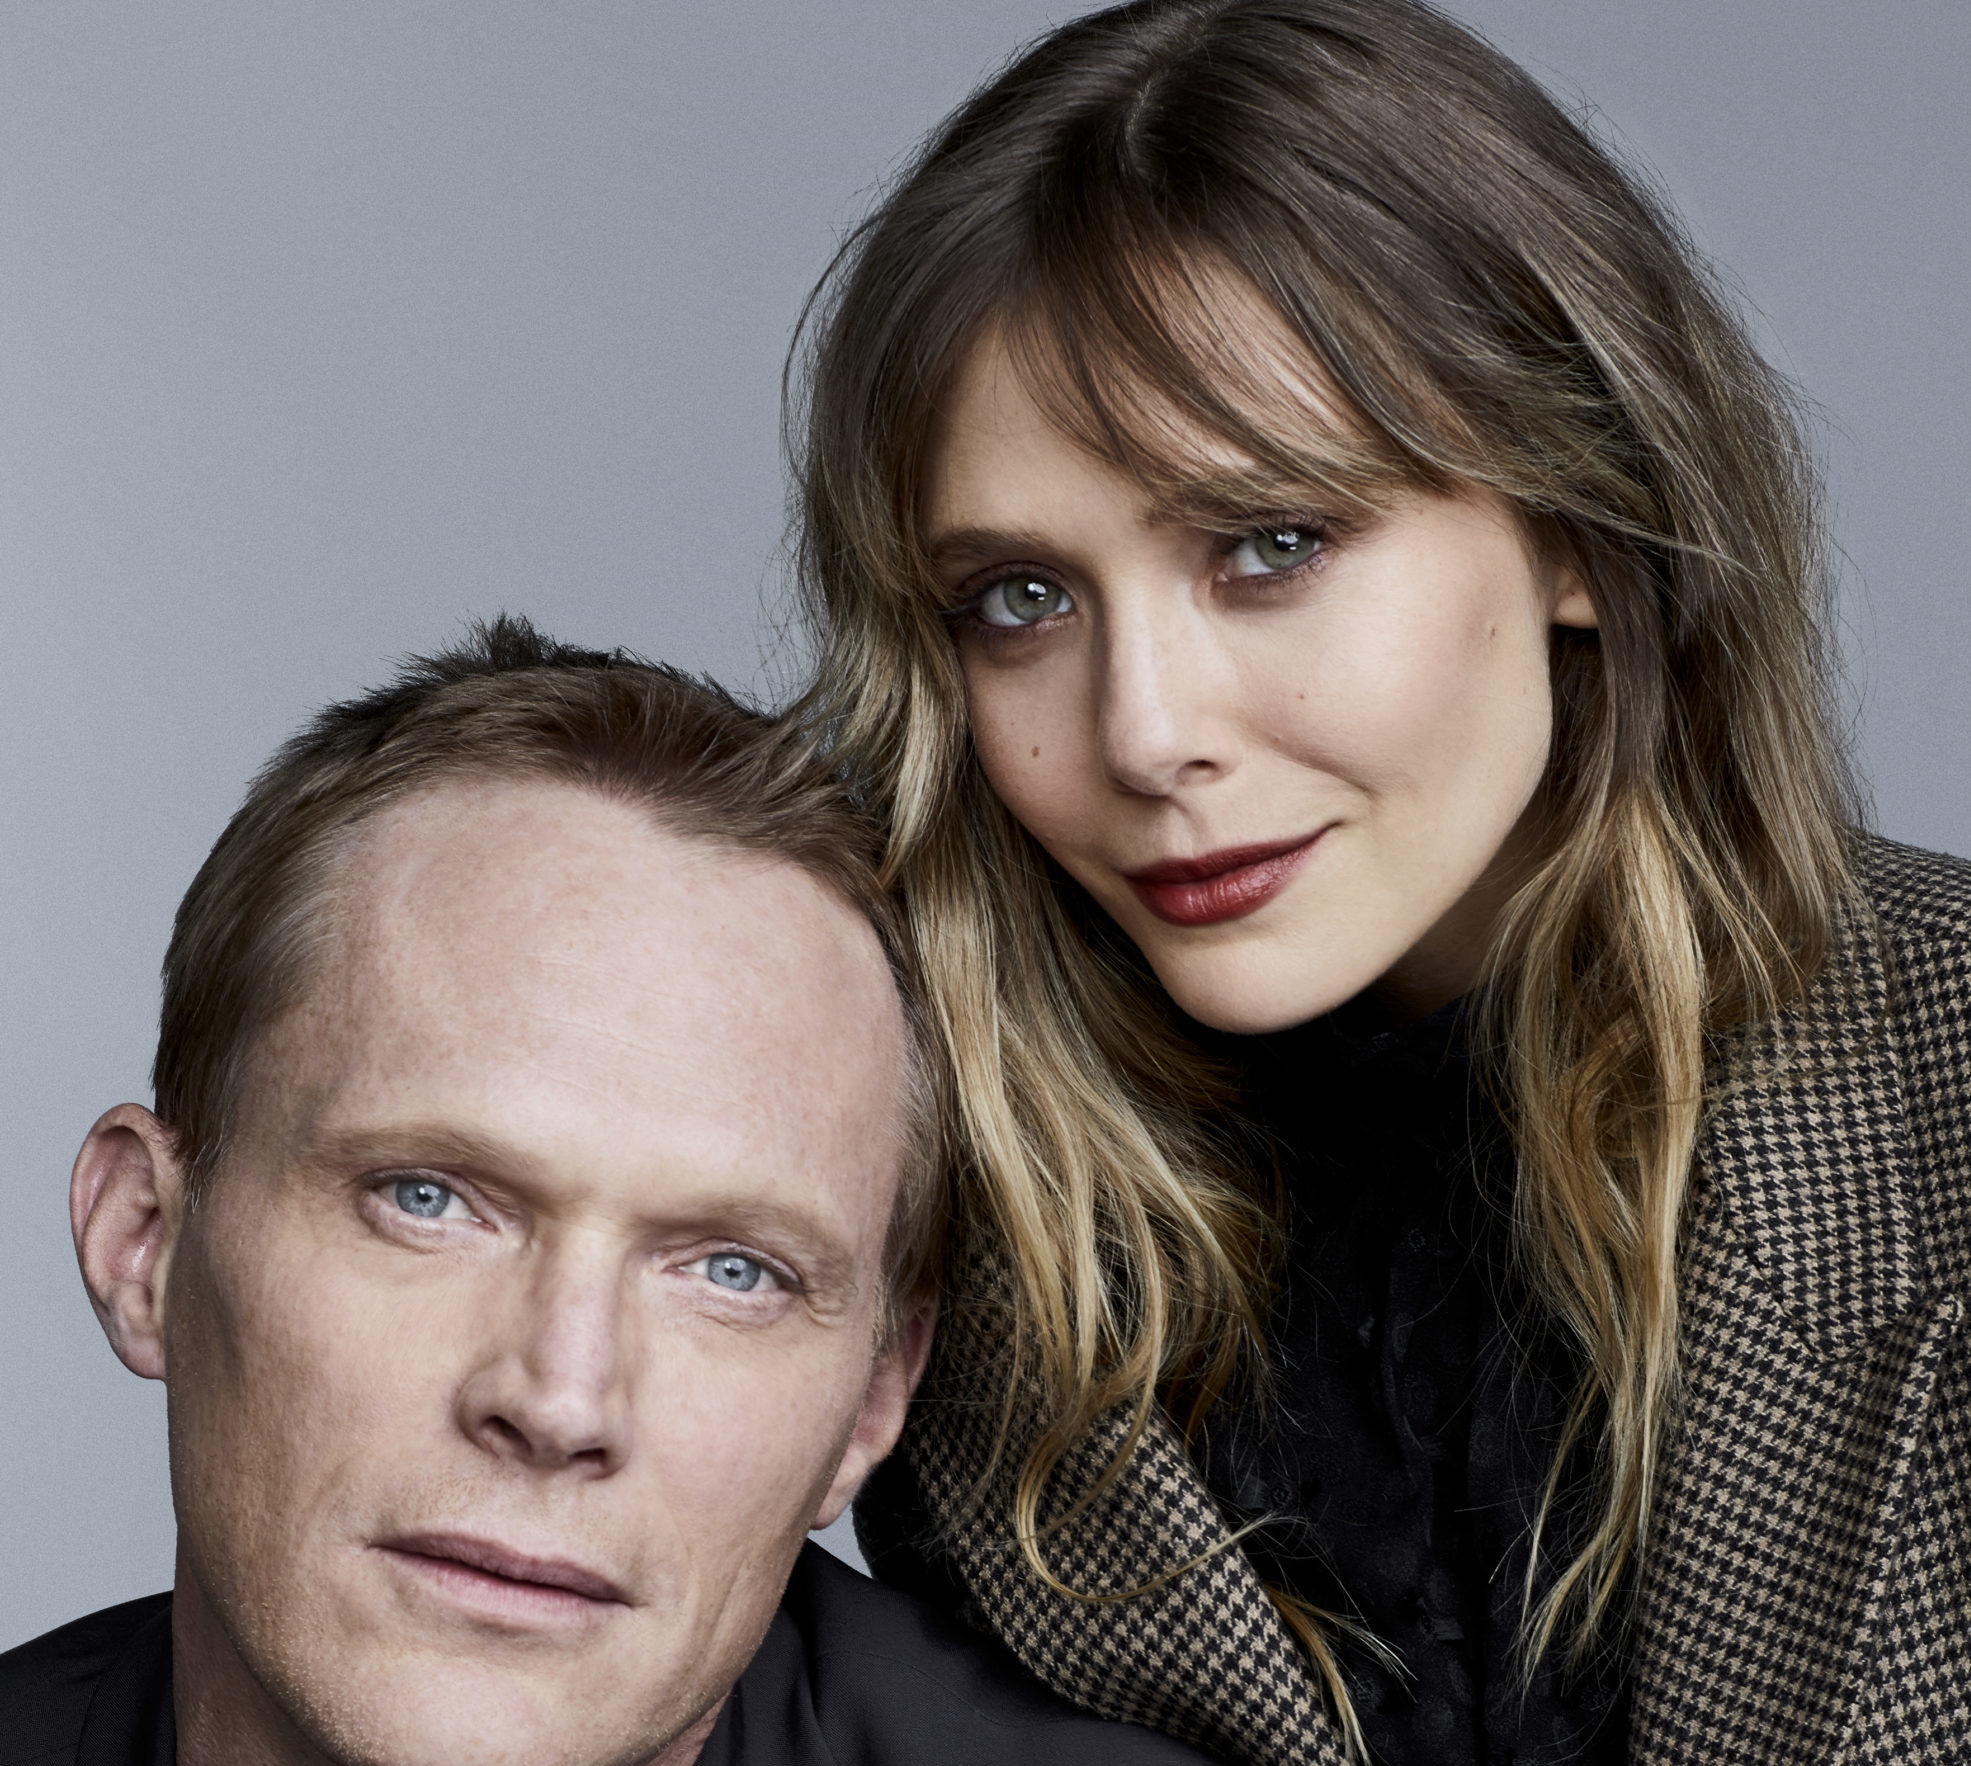 Elizabeth Olsen And Paul Bettany Play The Newlywed Game